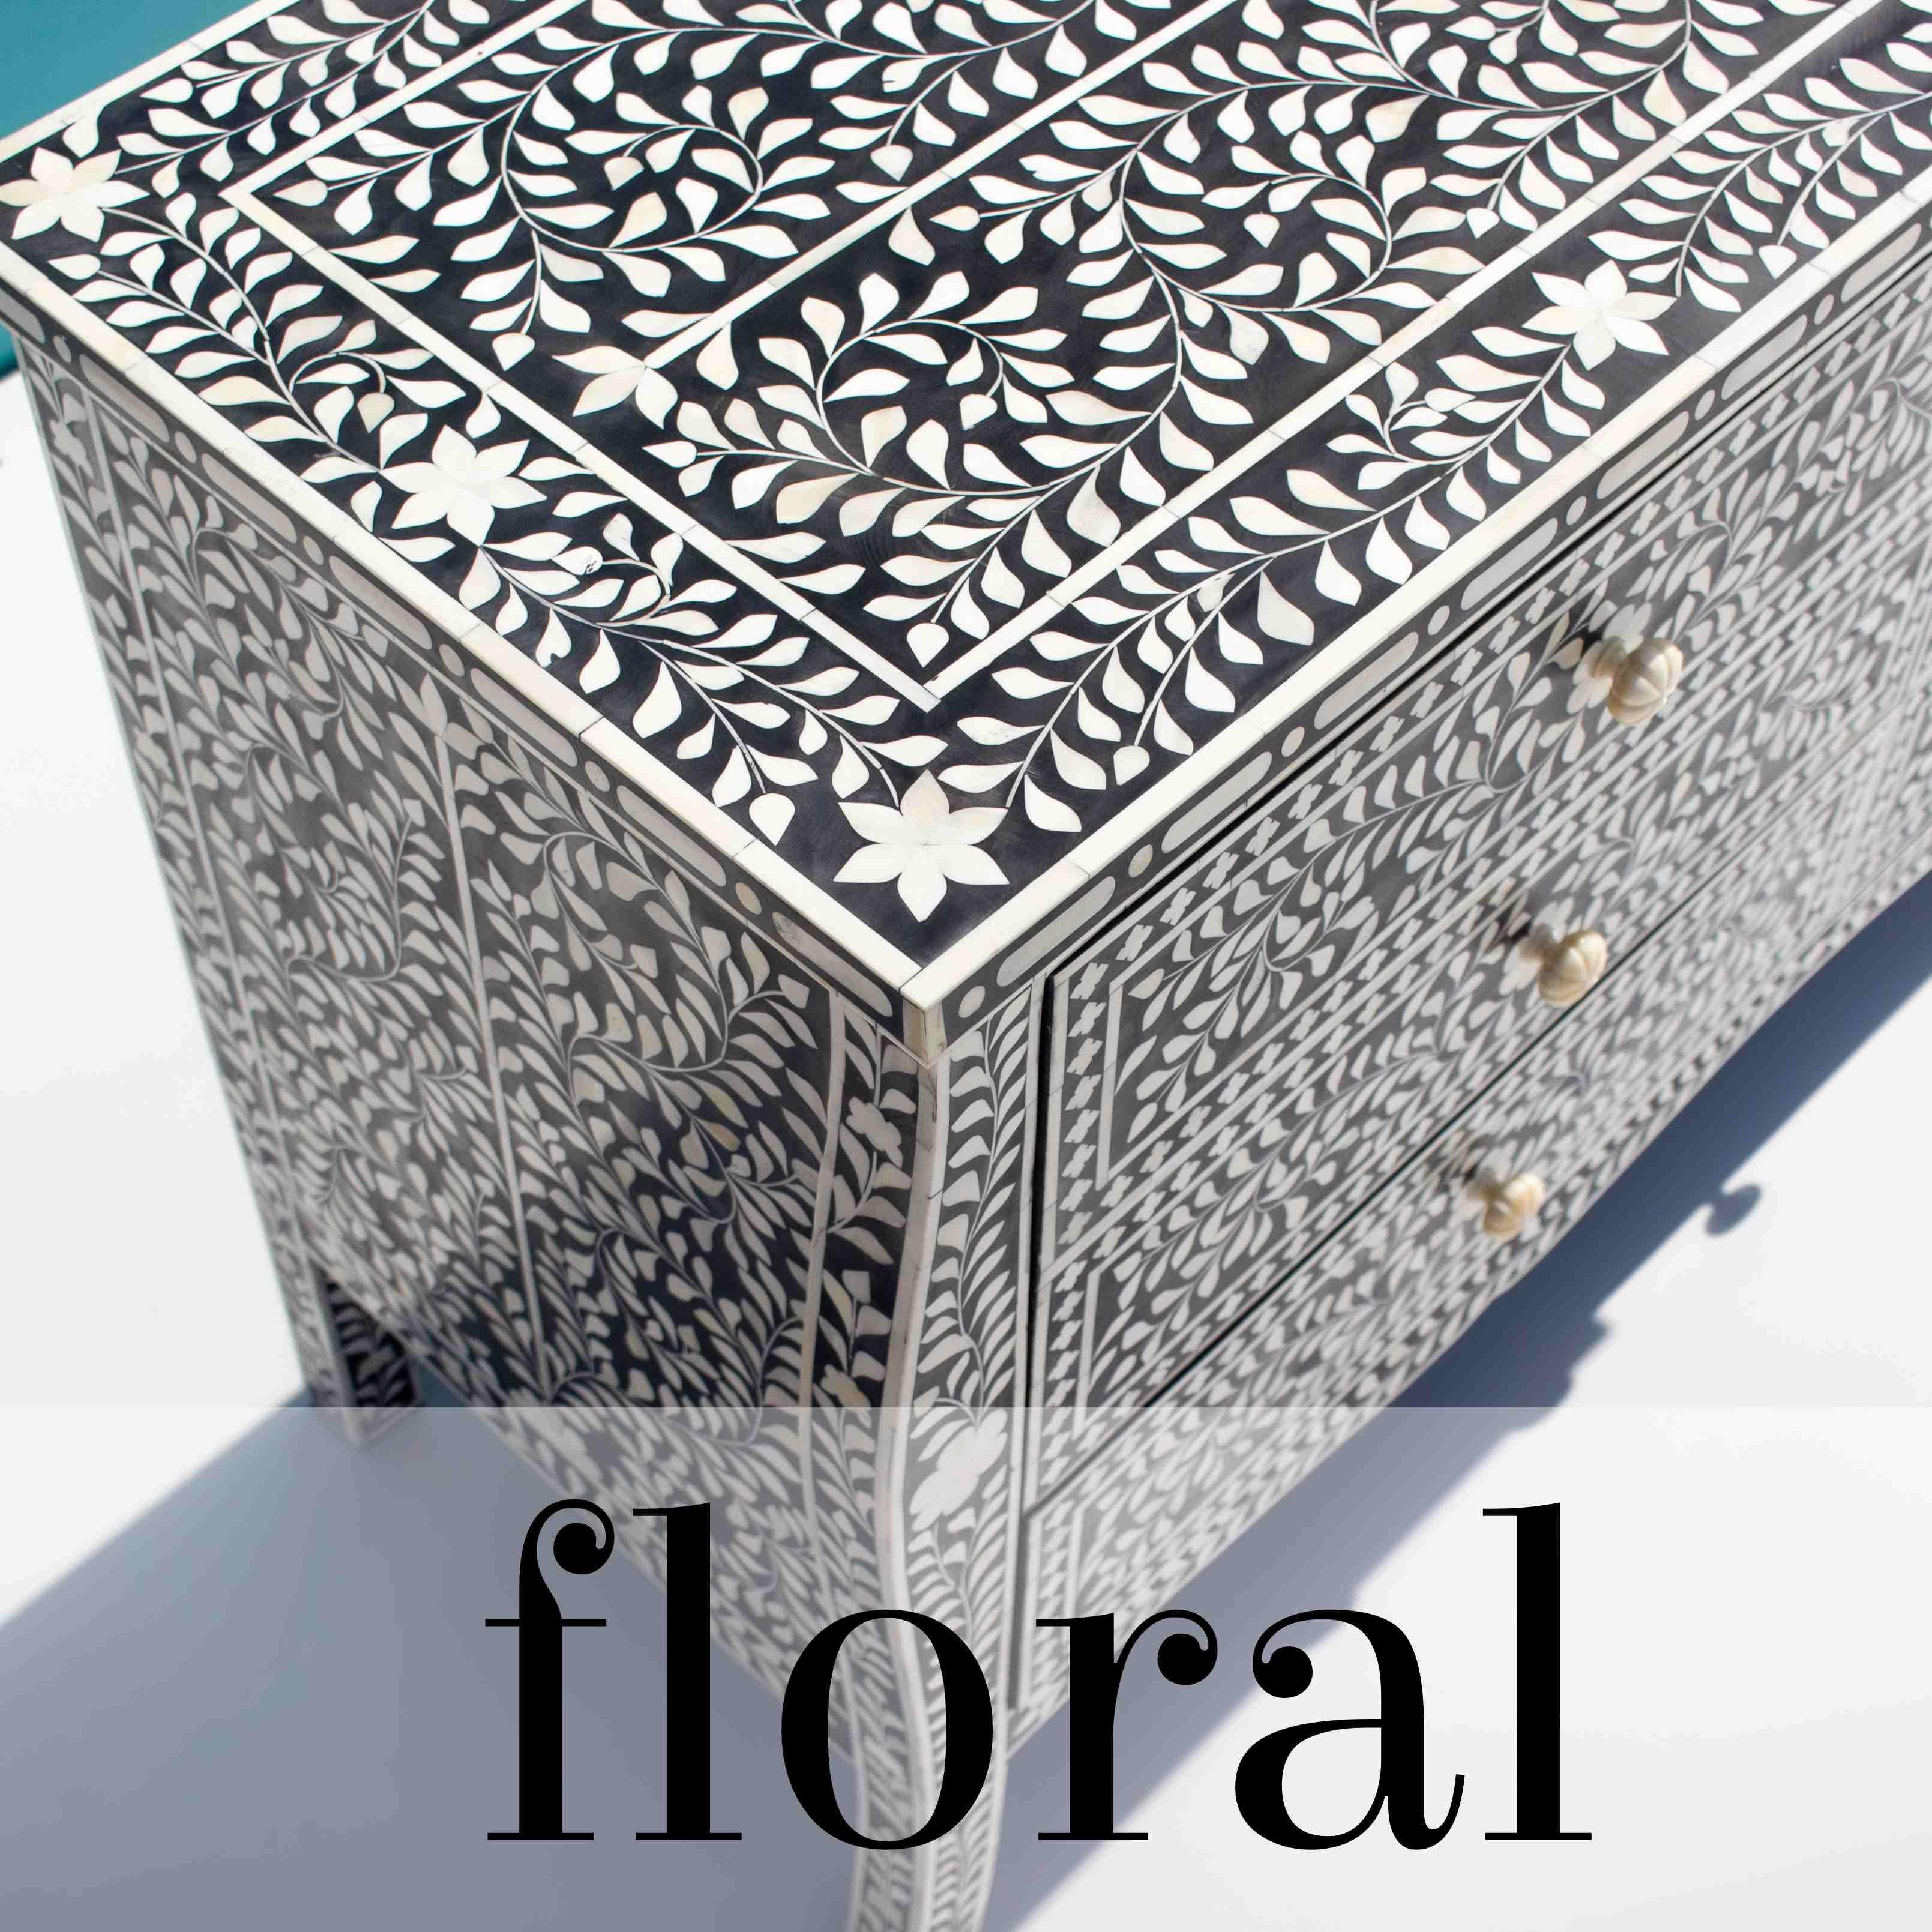 Introducing our exquisite Bone Inlay Dresser, an undeniable statement piece for any bedroom. This stunning six drawer dresser is entirely handmade, featuring intricate bone inlay details that are nothing short of breathtaking. The dresser is not